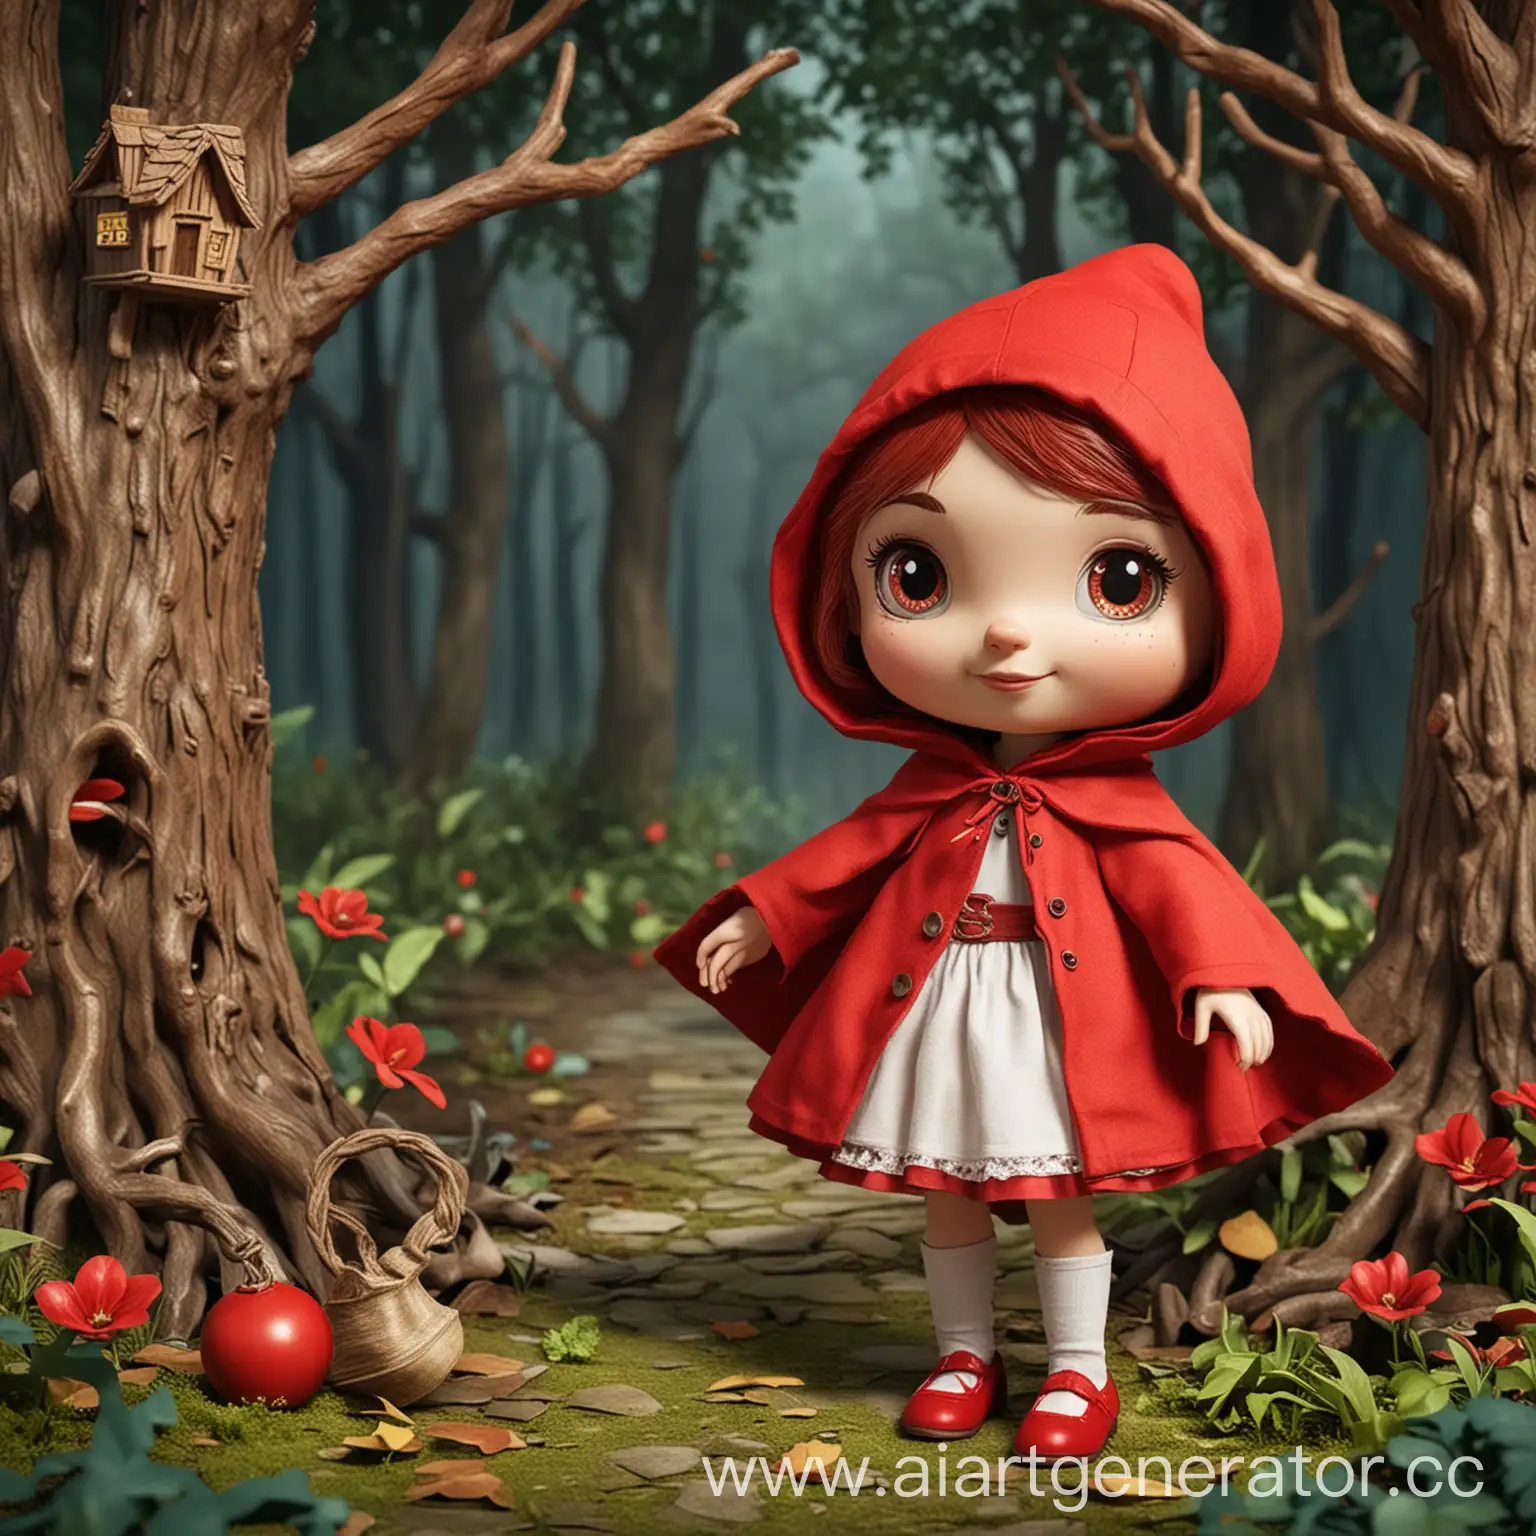 Create a Little Red Riding Hood game

